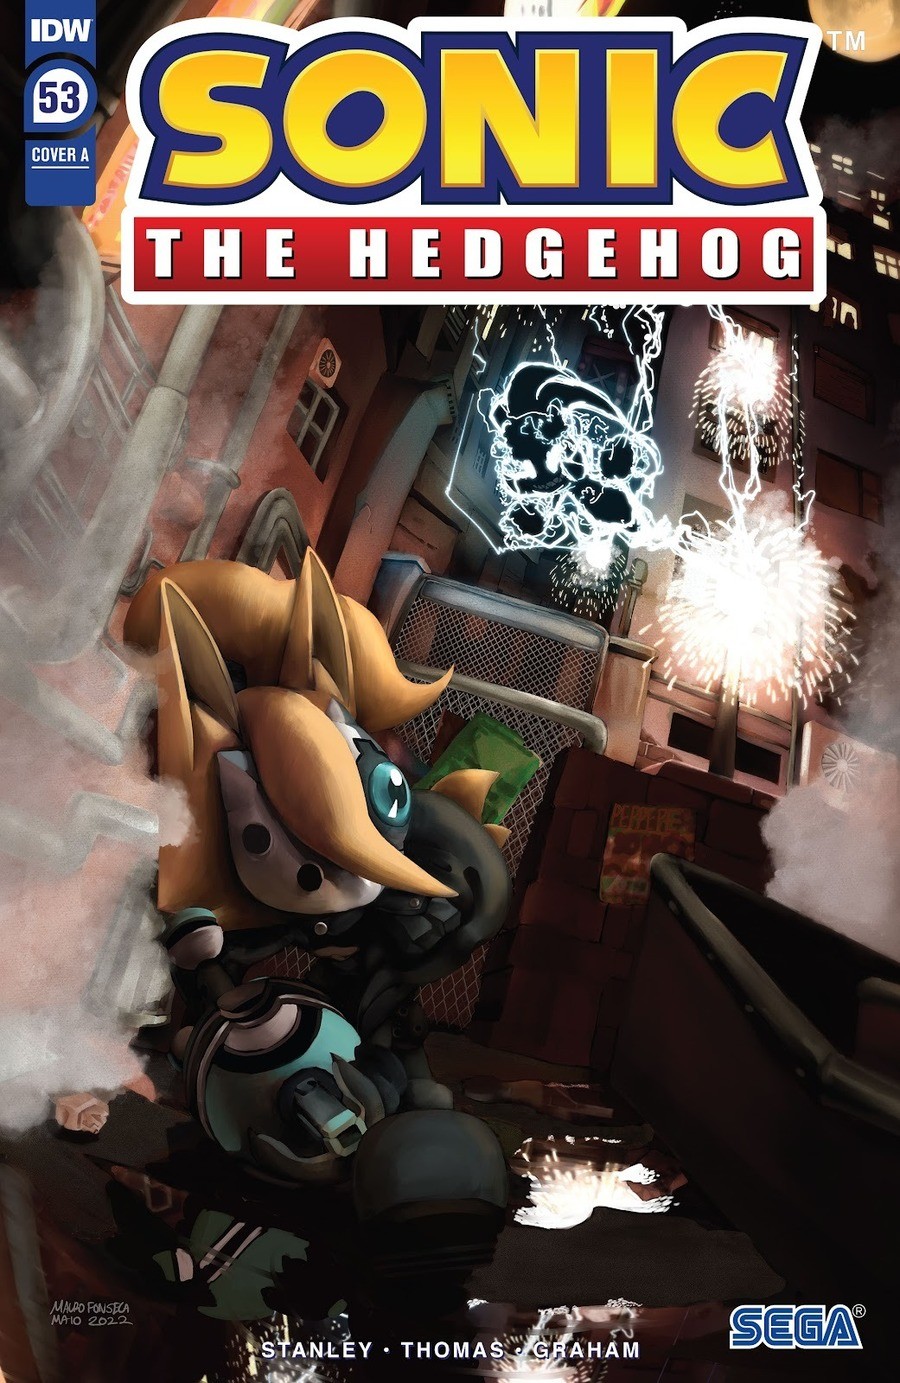 Sonic IDW #53. Man I am not a fan of this cover art. Like the ideas cool but the perspective is all weird and it looks wack. join list: SonicIDW (93 subs)Mentio